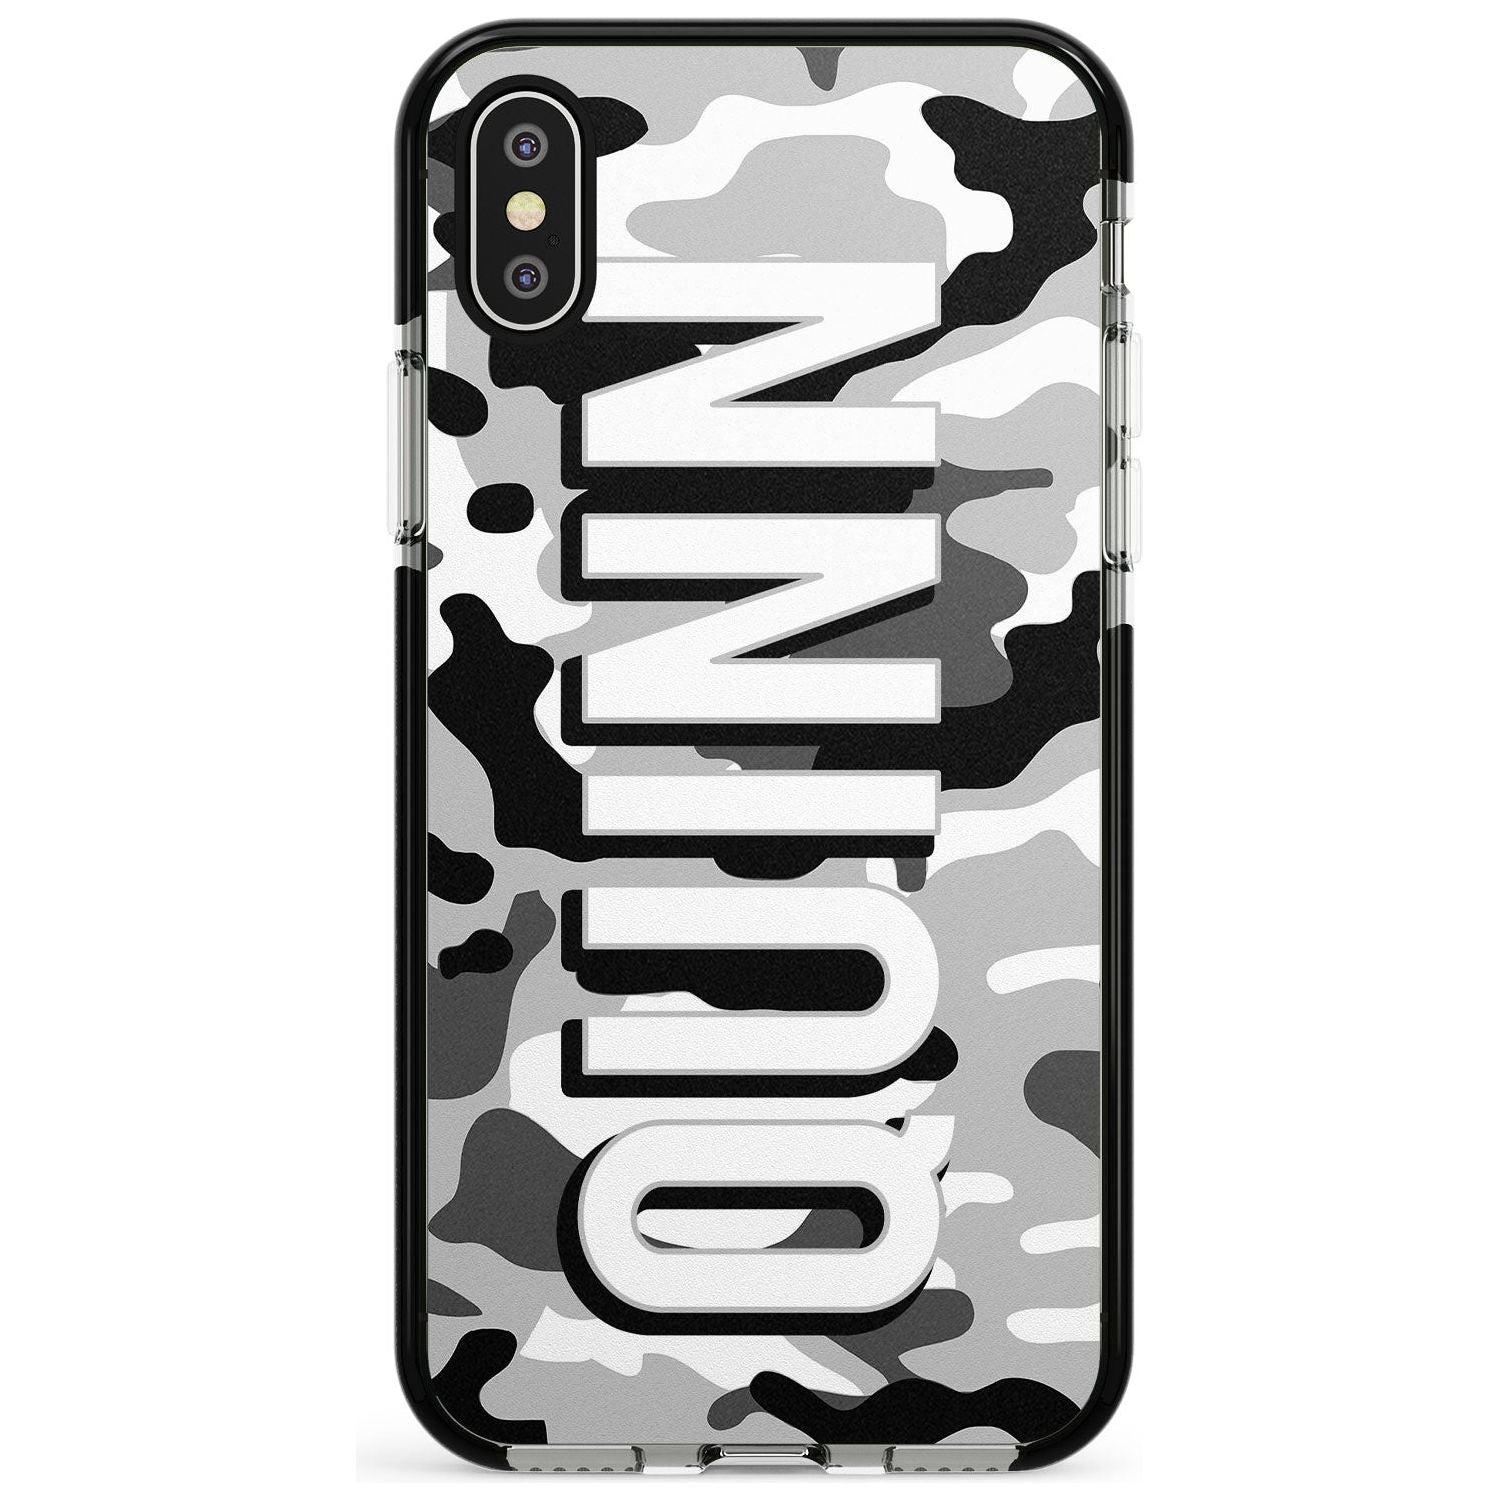 Greyscale Camo Pink Fade Impact Phone Case for iPhone X XS Max XR